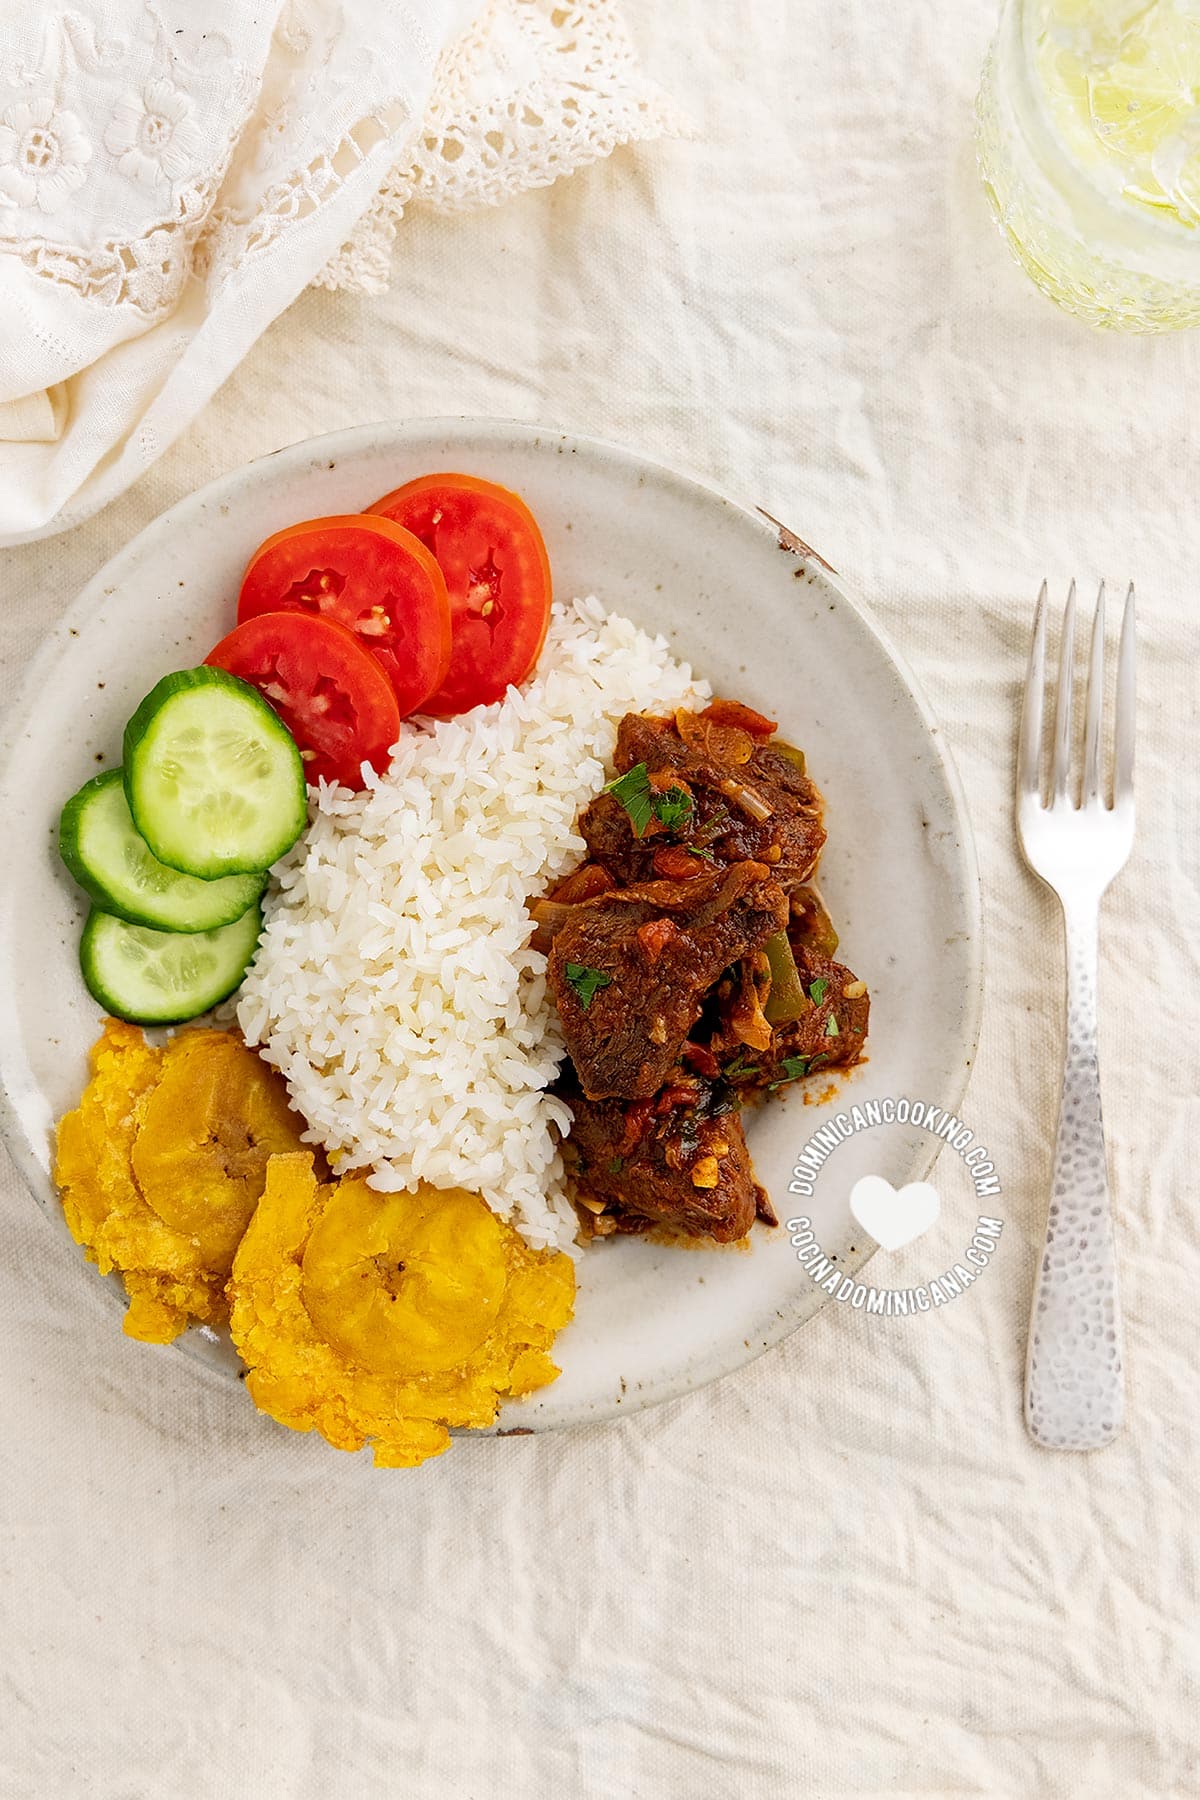 Carne de Res Guisada (Dominican Braised Beef) served with to rice, tostones, and salad